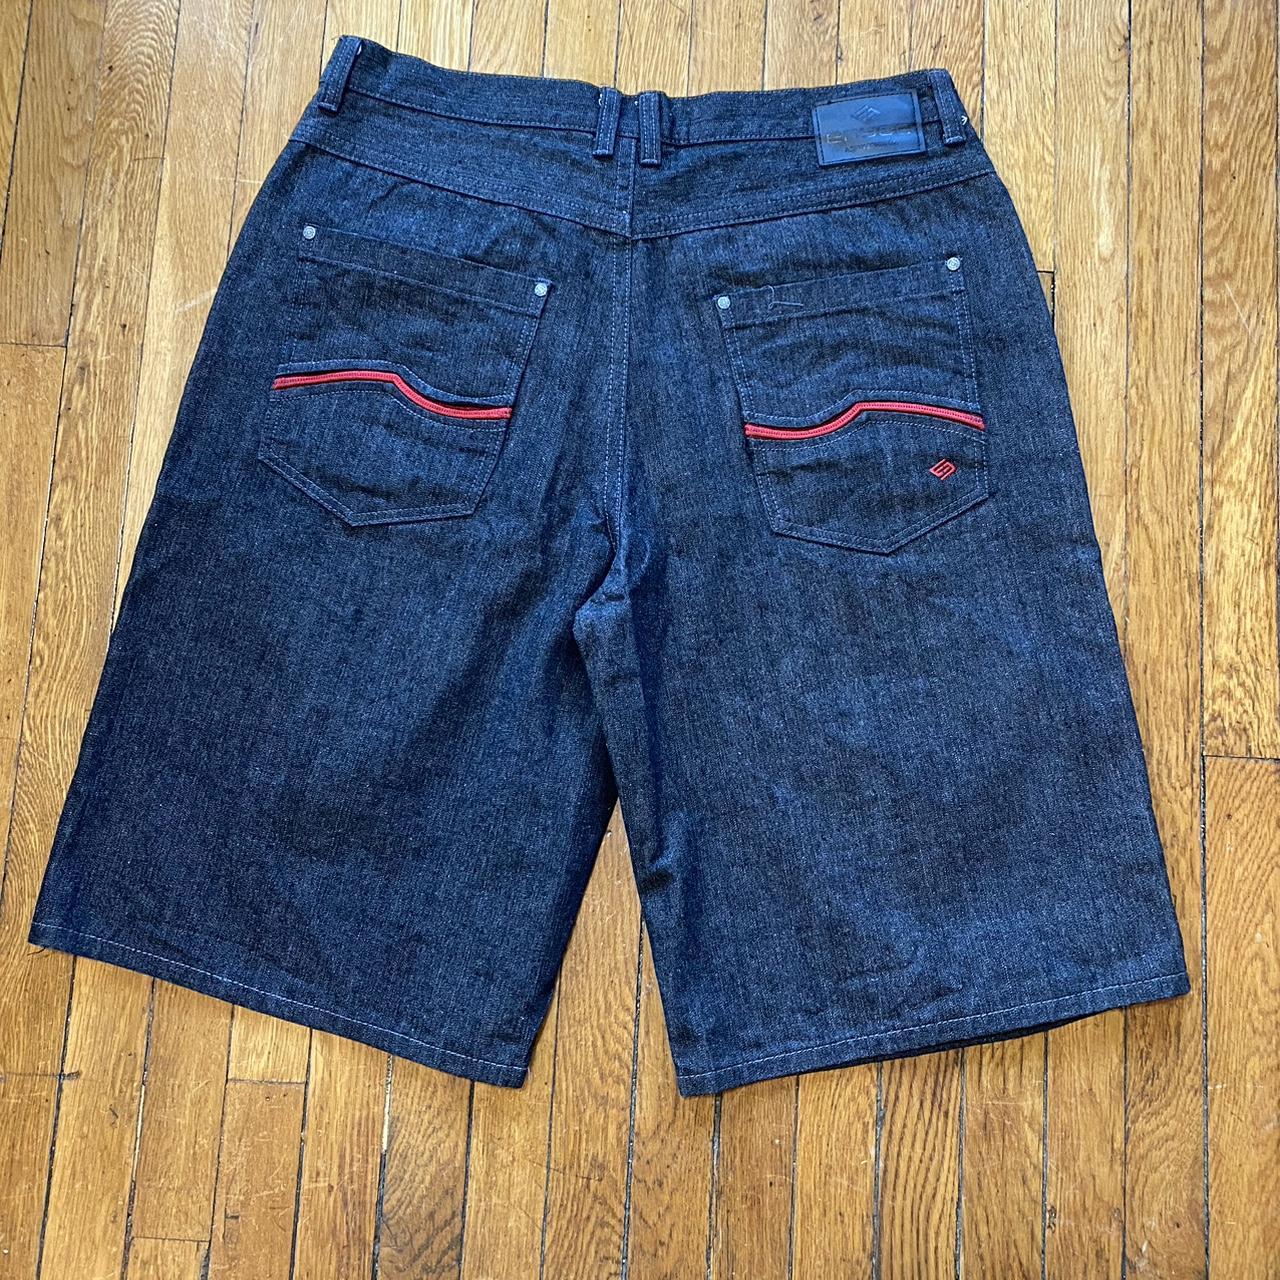 Vintage early 2000s enyce jorts size 40 baggy fit... - Depop